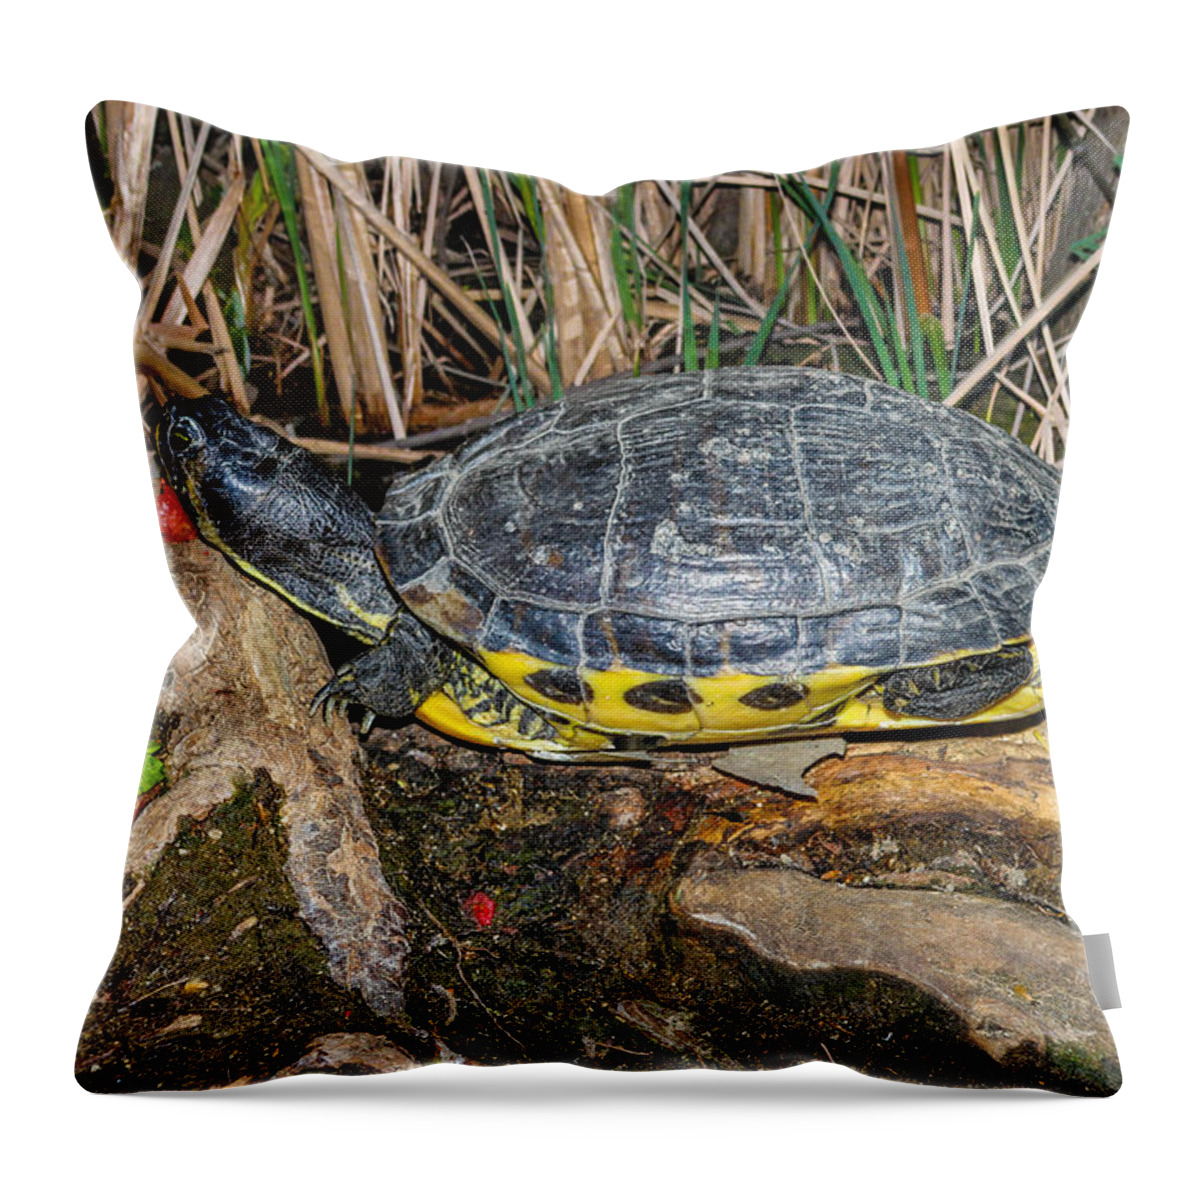 Turtle Throw Pillow featuring the photograph Resting #1 by Robert Hebert